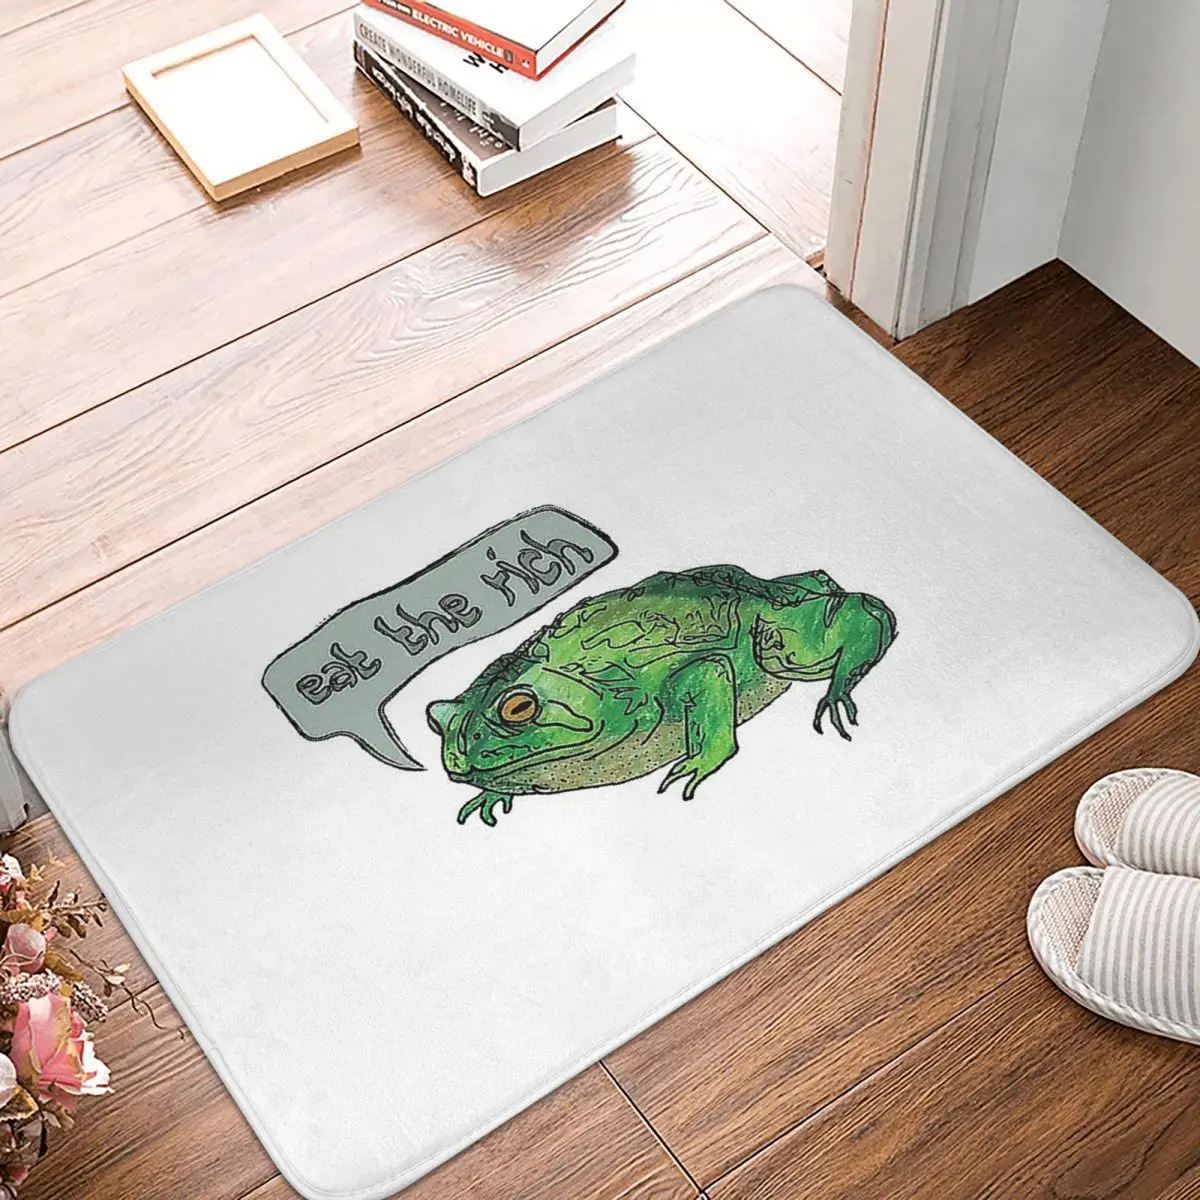 

Eat The Rich Toad Bath Non-Slip Carpet Frog Froggie Funny Interesting Living Room Mat Welcome Doormat Home Decoration Rug